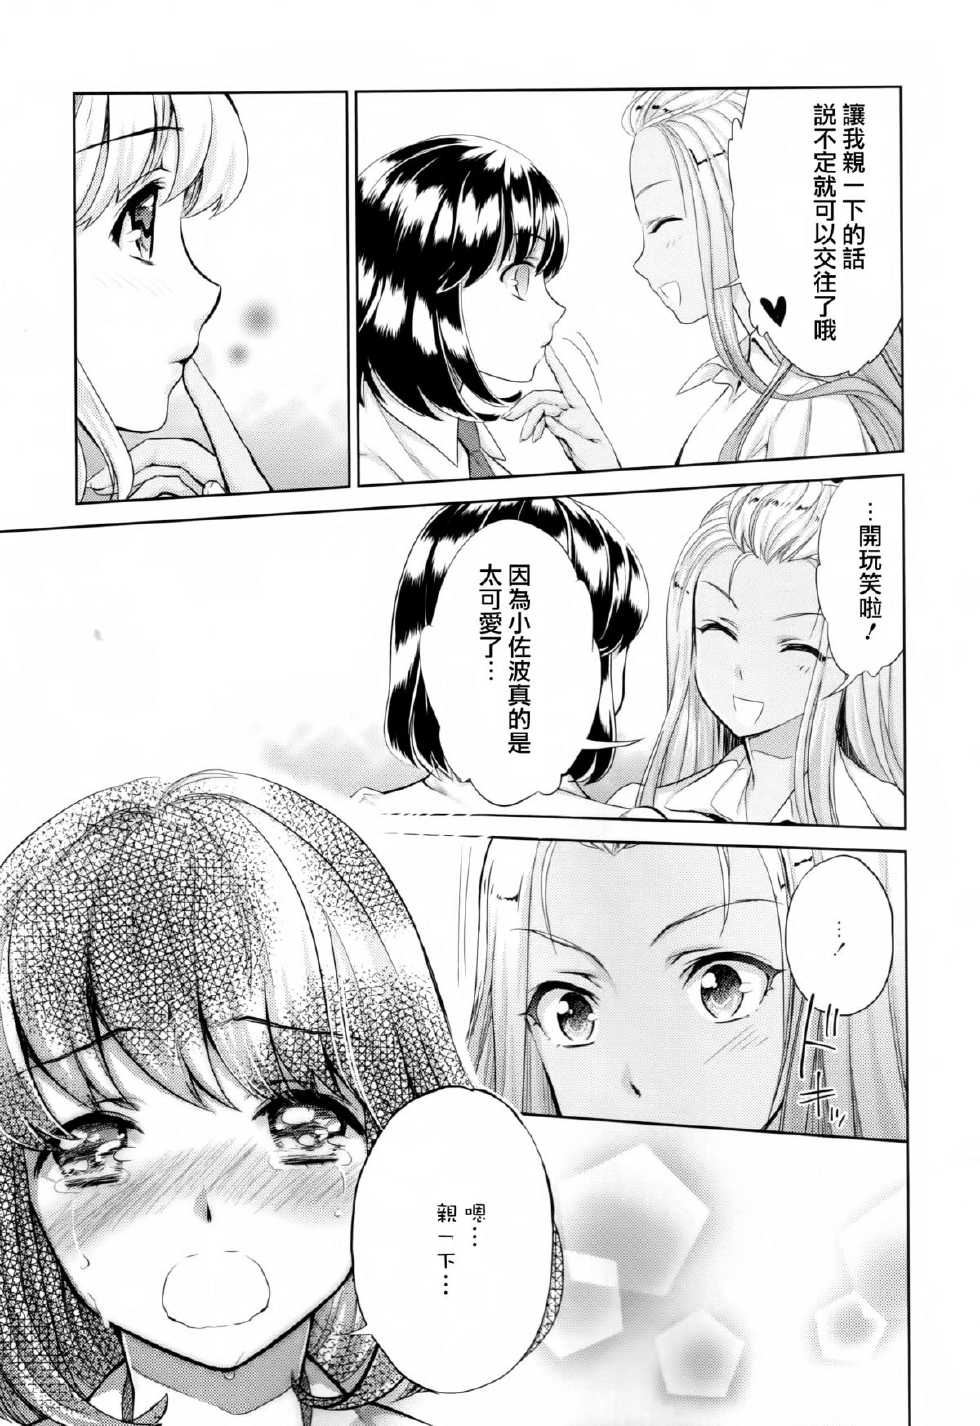 [Anthology] Ki Yuri -Falling In Love With A Classmate- [Chinese] [Dora烧鸡个人汉化] - Page 31